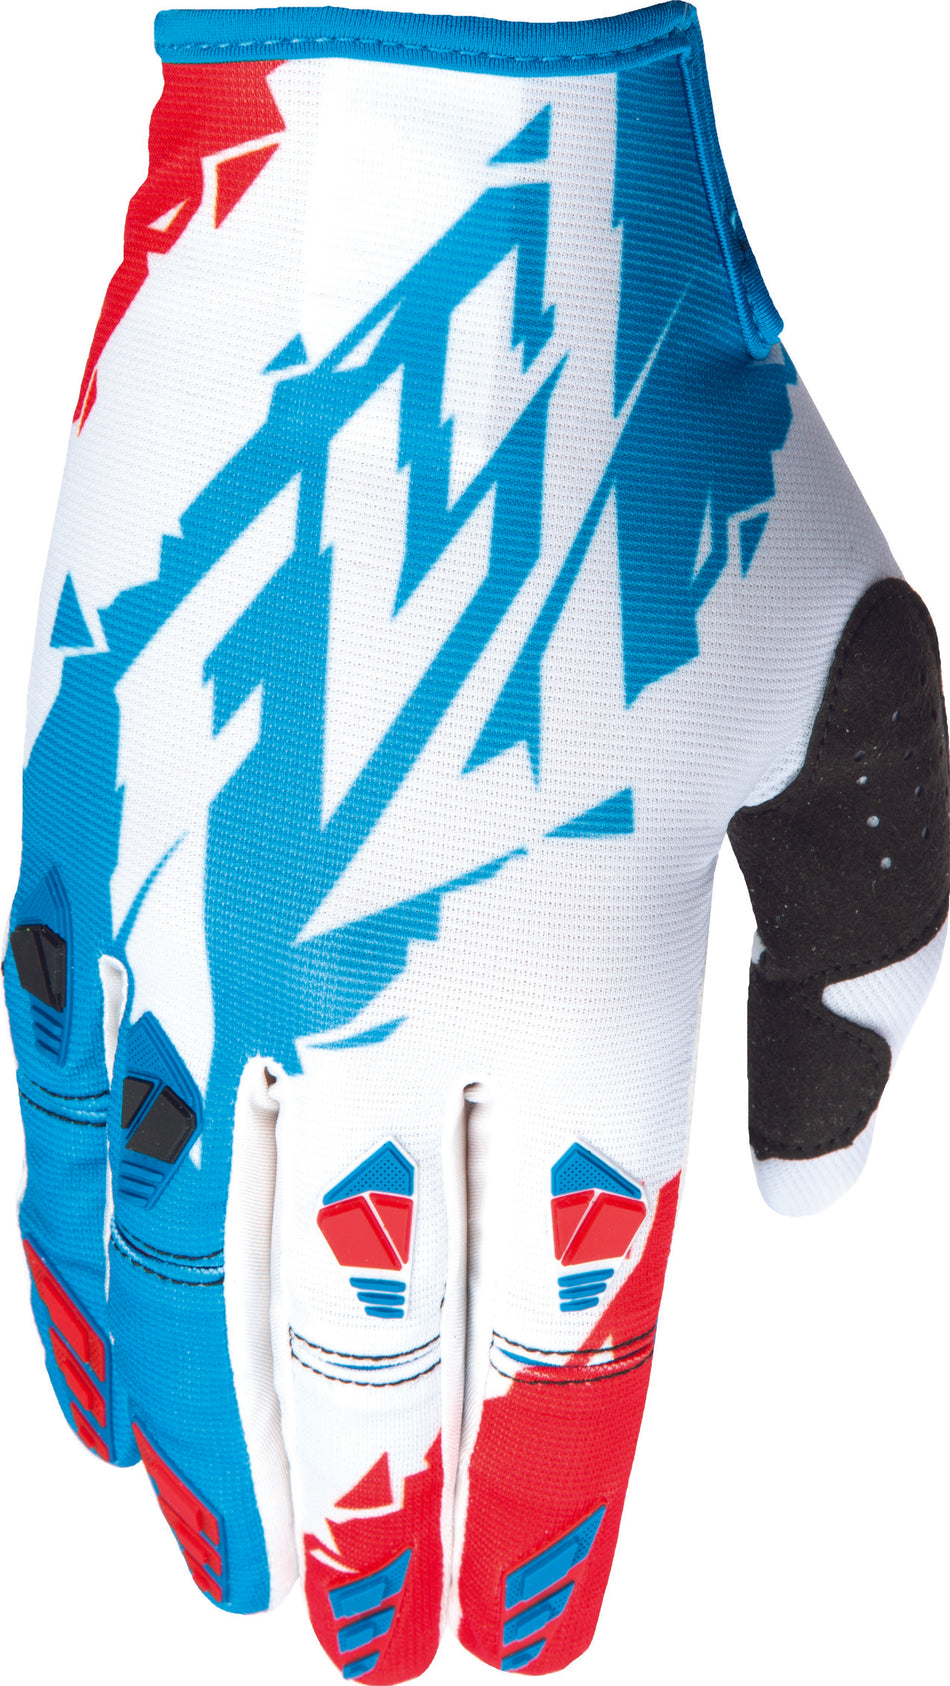 FLY RACING Kinetic Glove Red/White/Blue Sz 11 X 370-41111